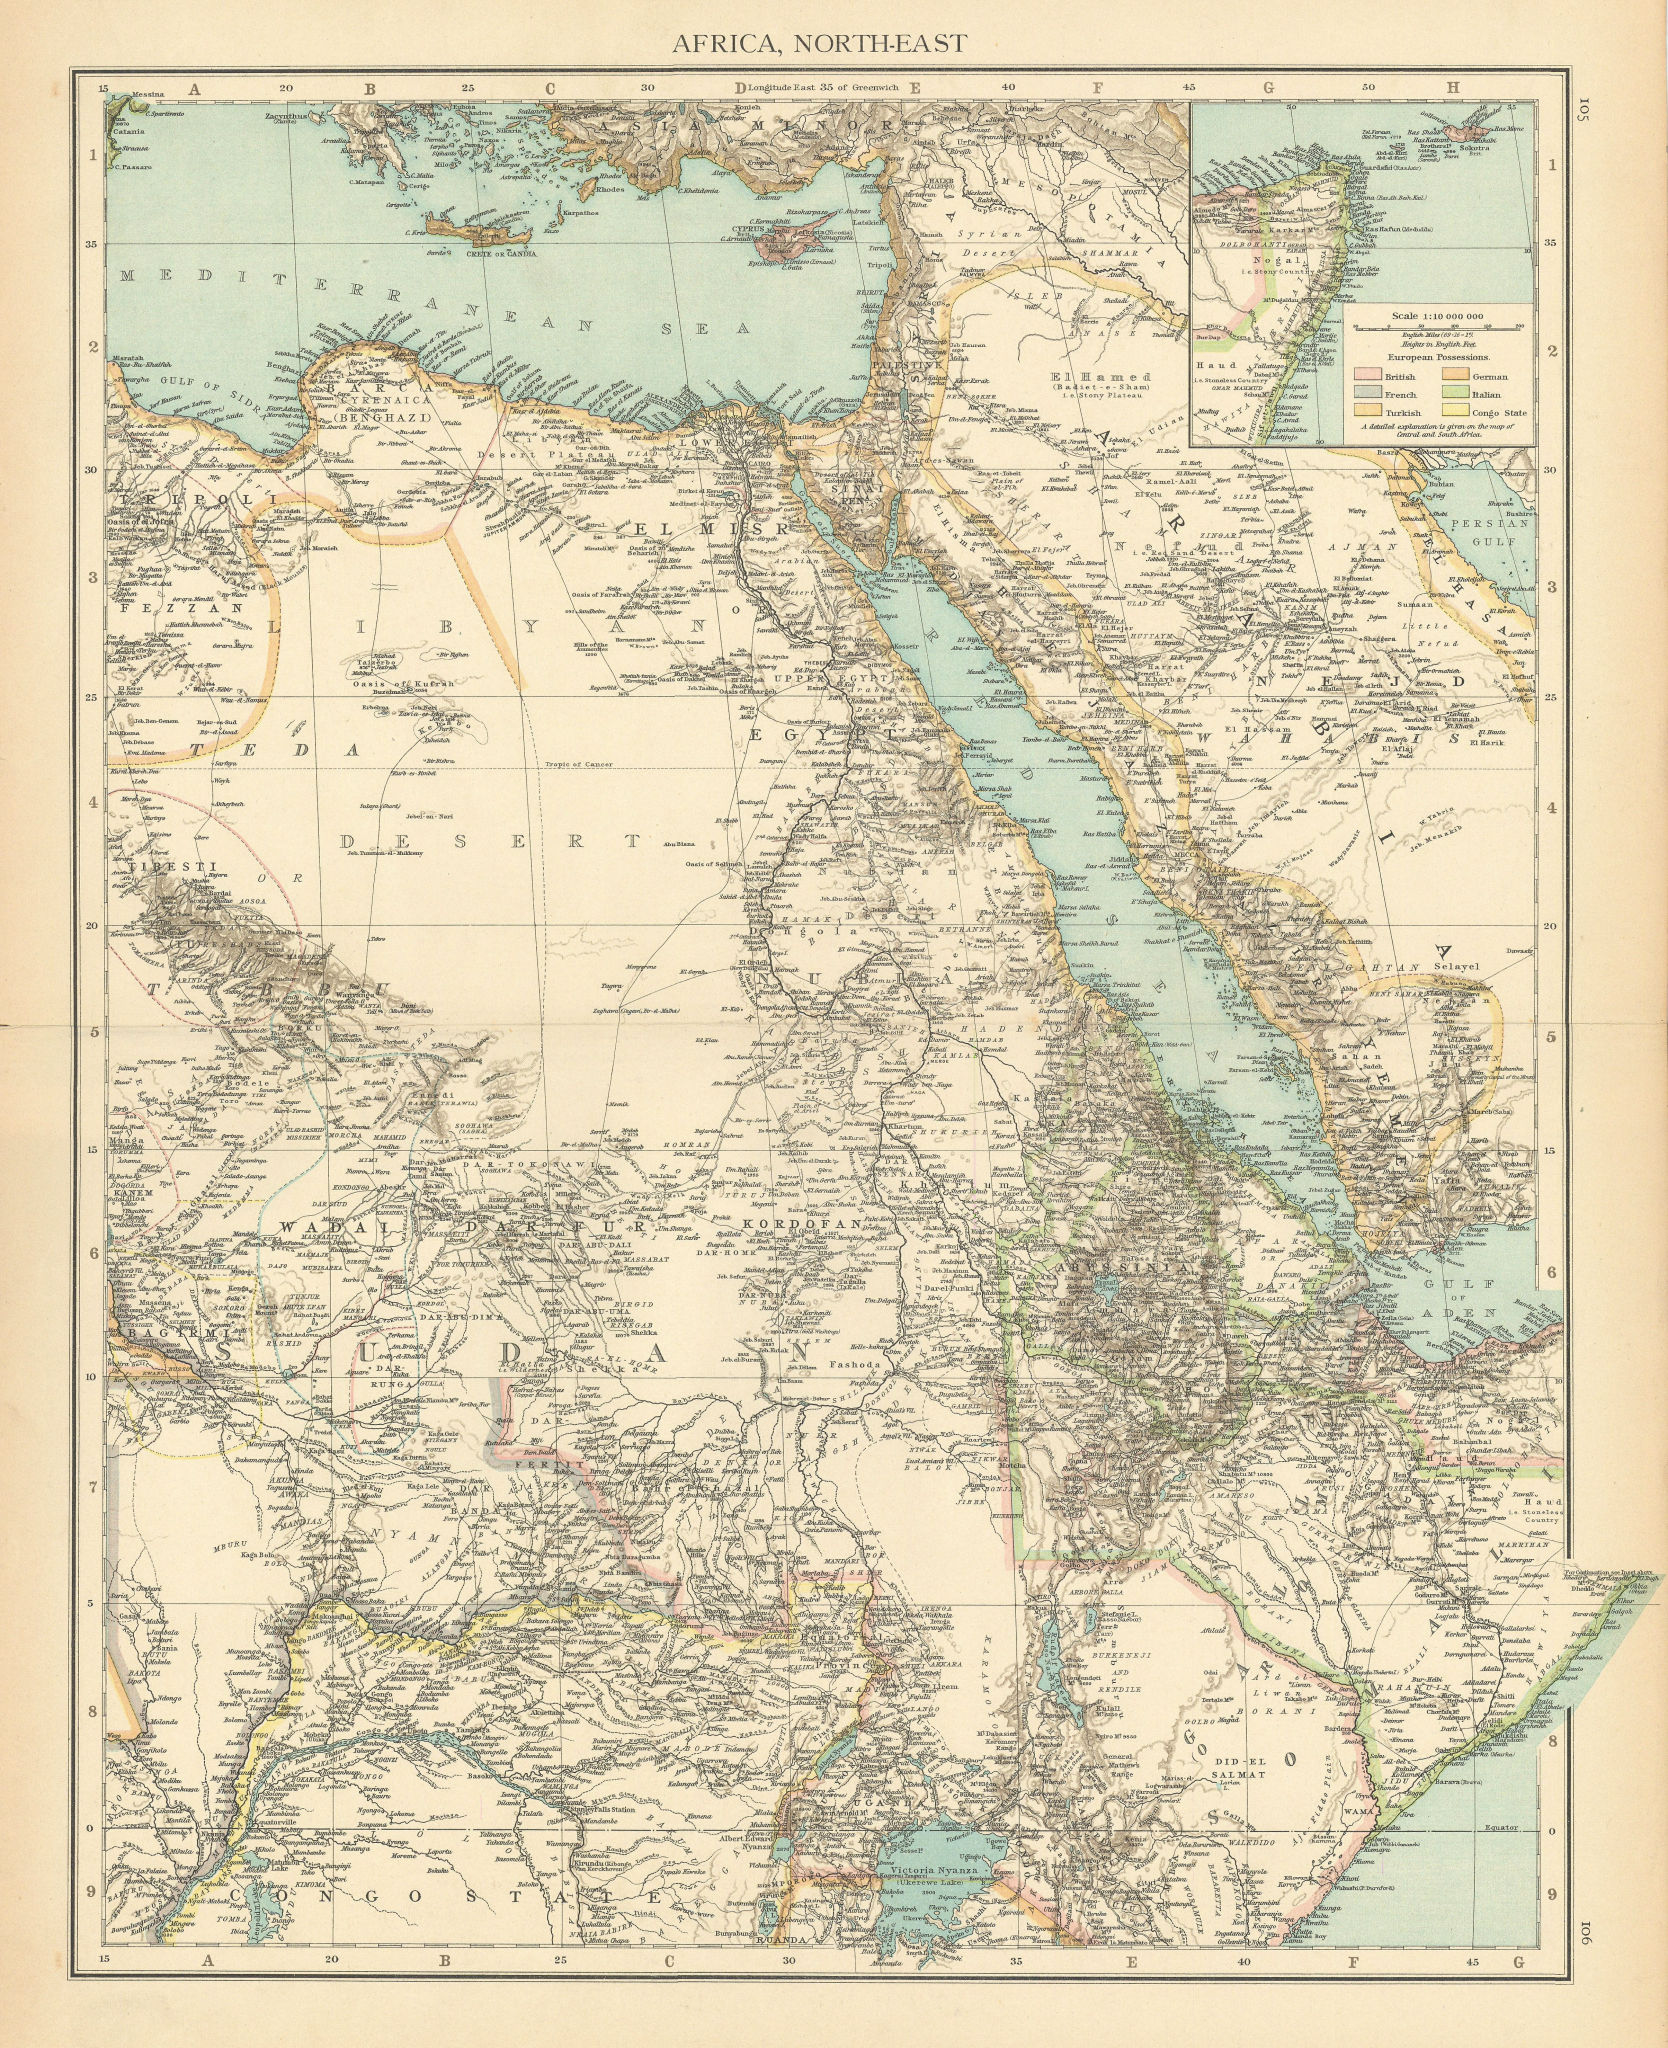 Associate Product Colonial Africa North-East. Hejaz Kenya Abyssinia Sudan. THE TIMES 1895 map